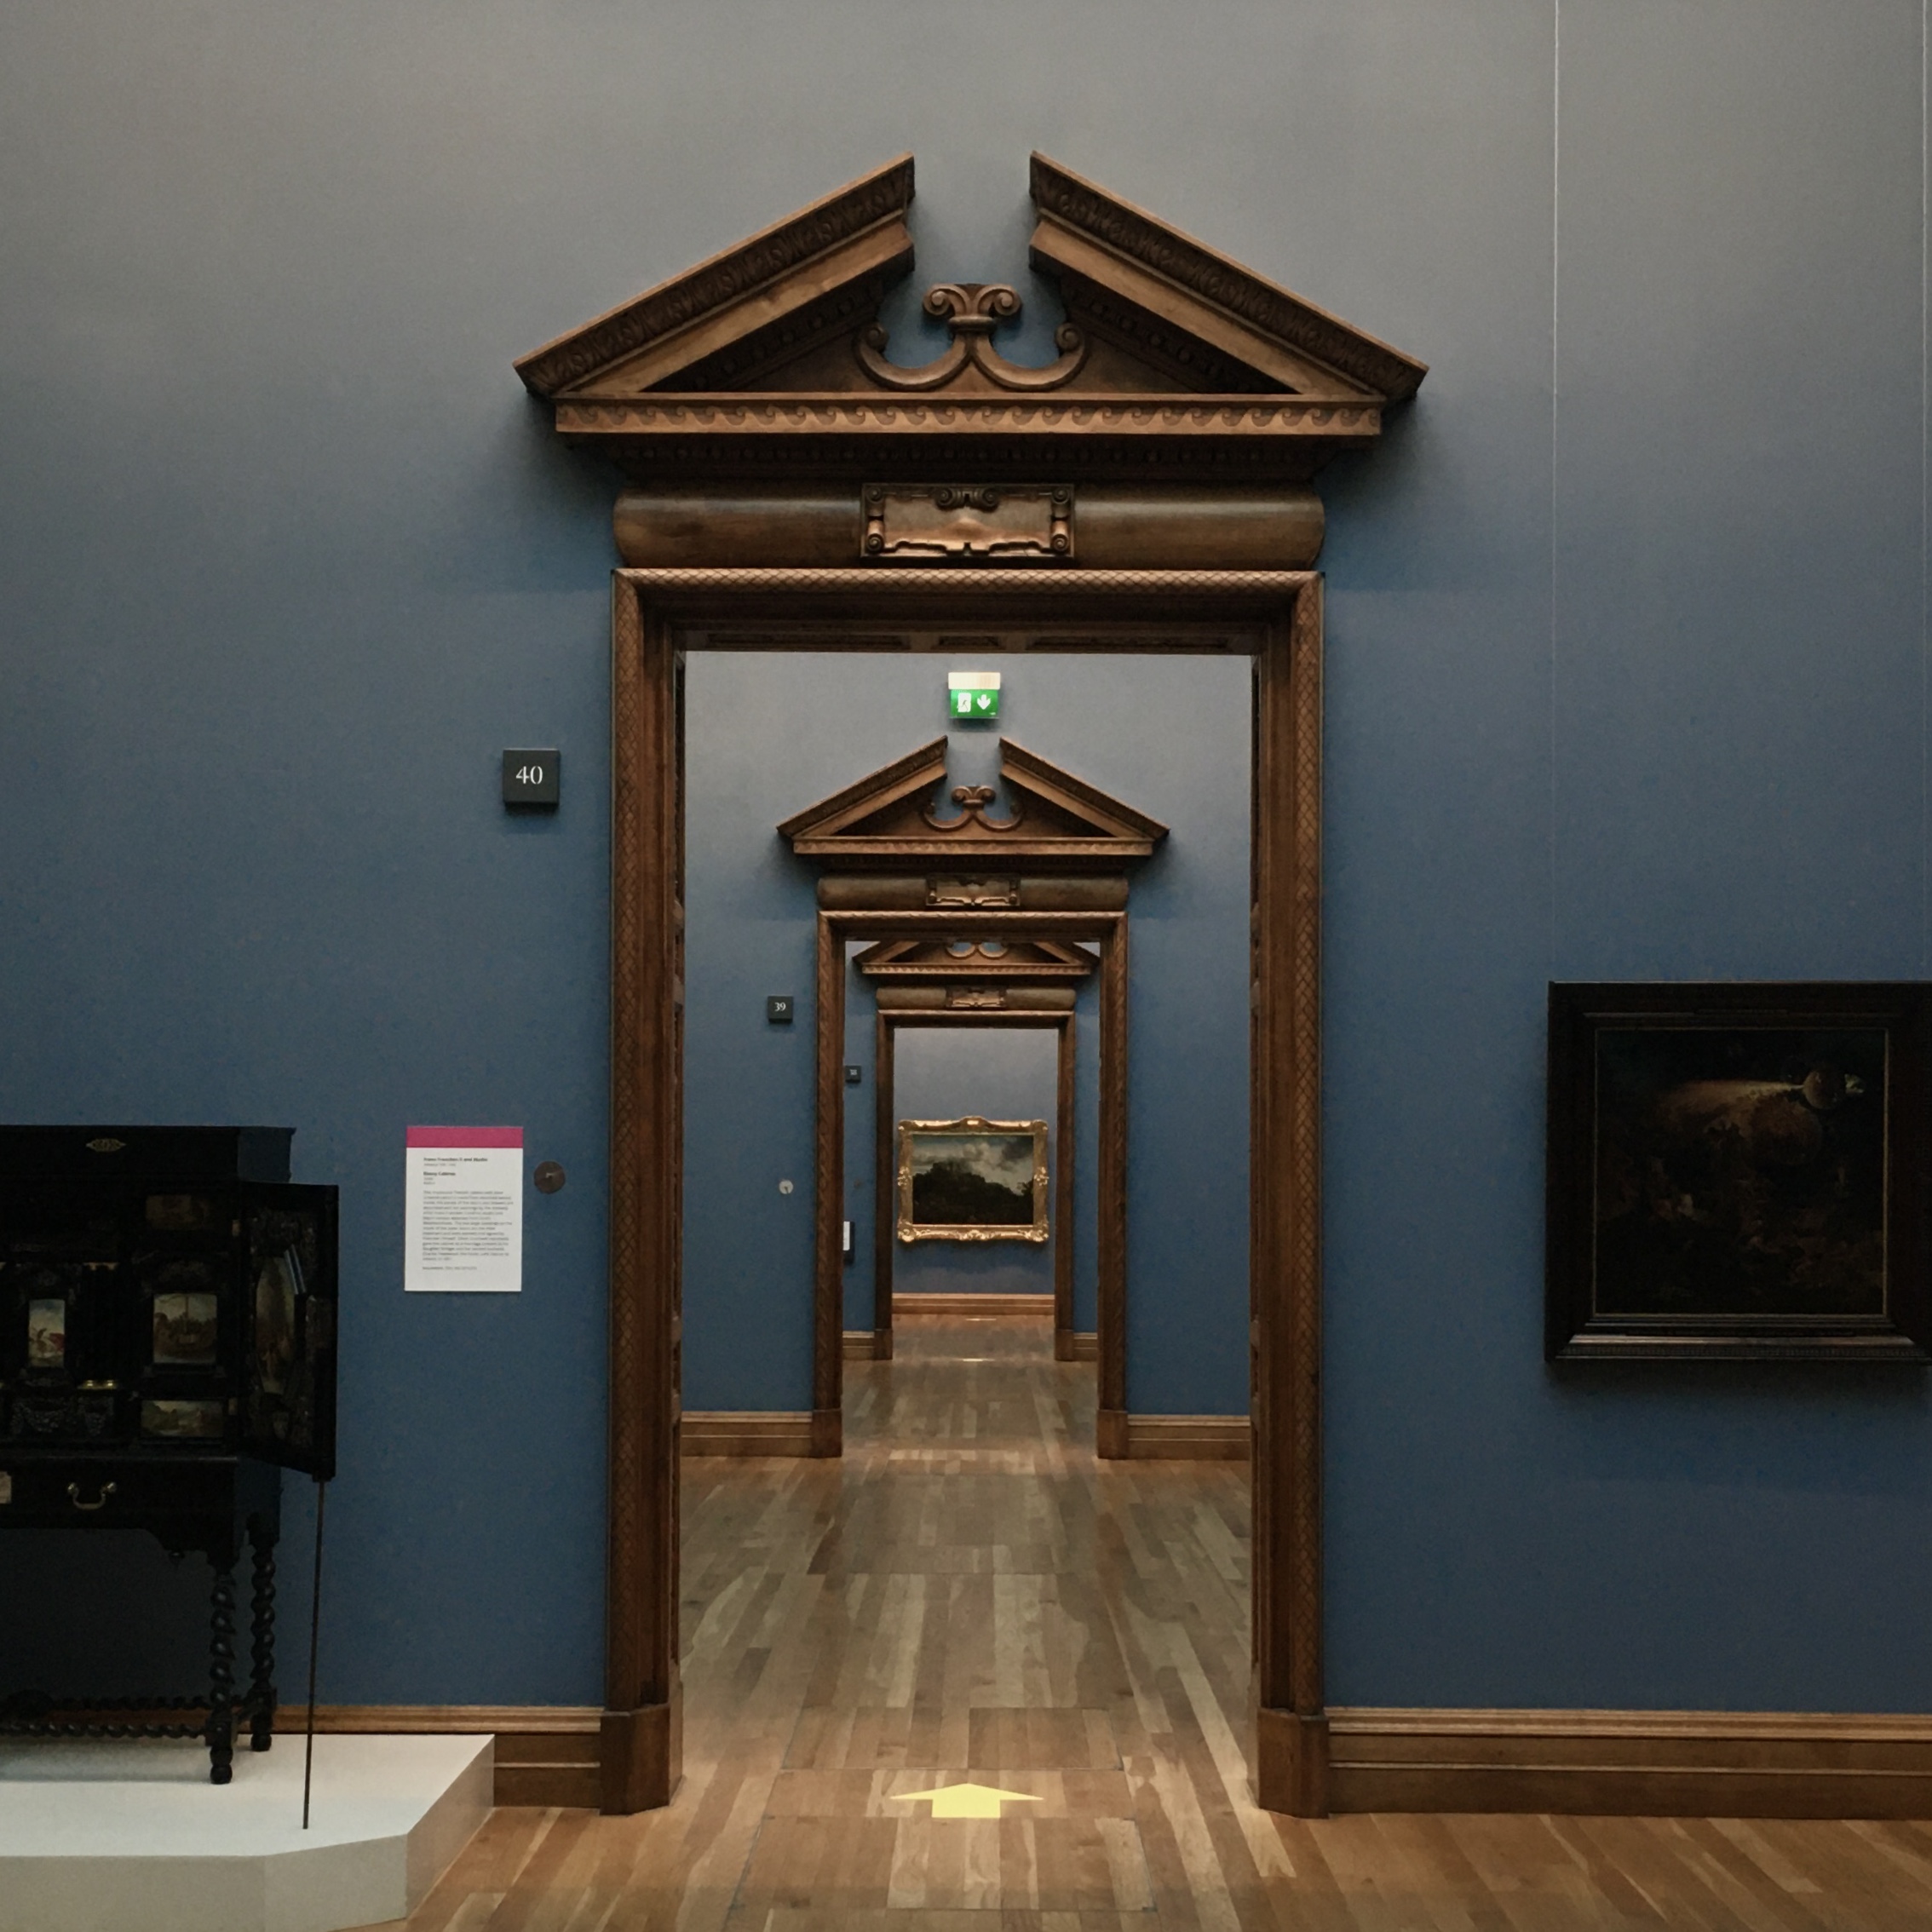 Concentric doorways in the National Gallery